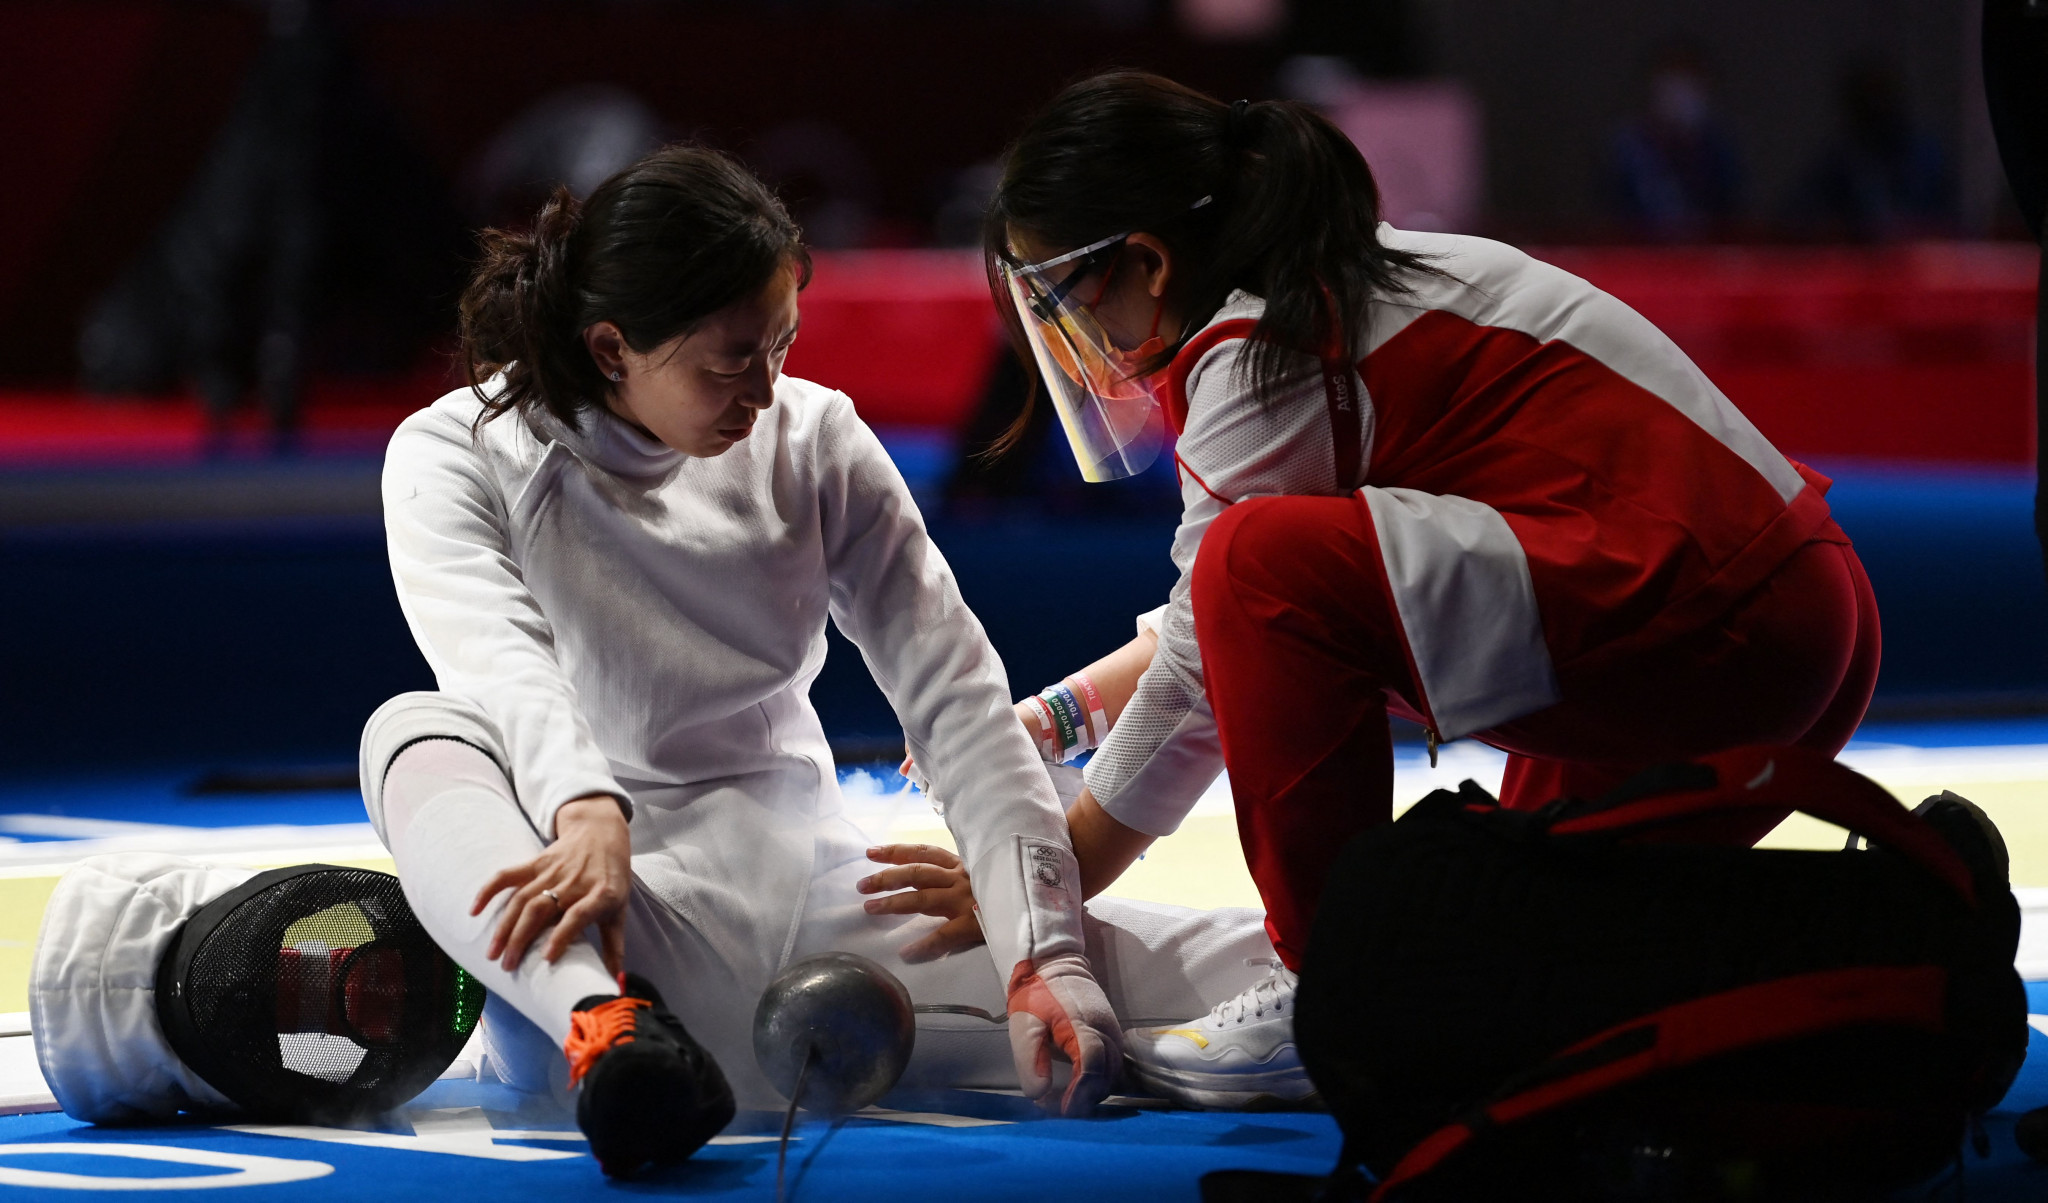  Sun Yiwen, the first Chinese fencer to win an Olympic individual women's épée gold medal, has returned from a long spell out to resume preparations for Paris 2024 ©Getty Images